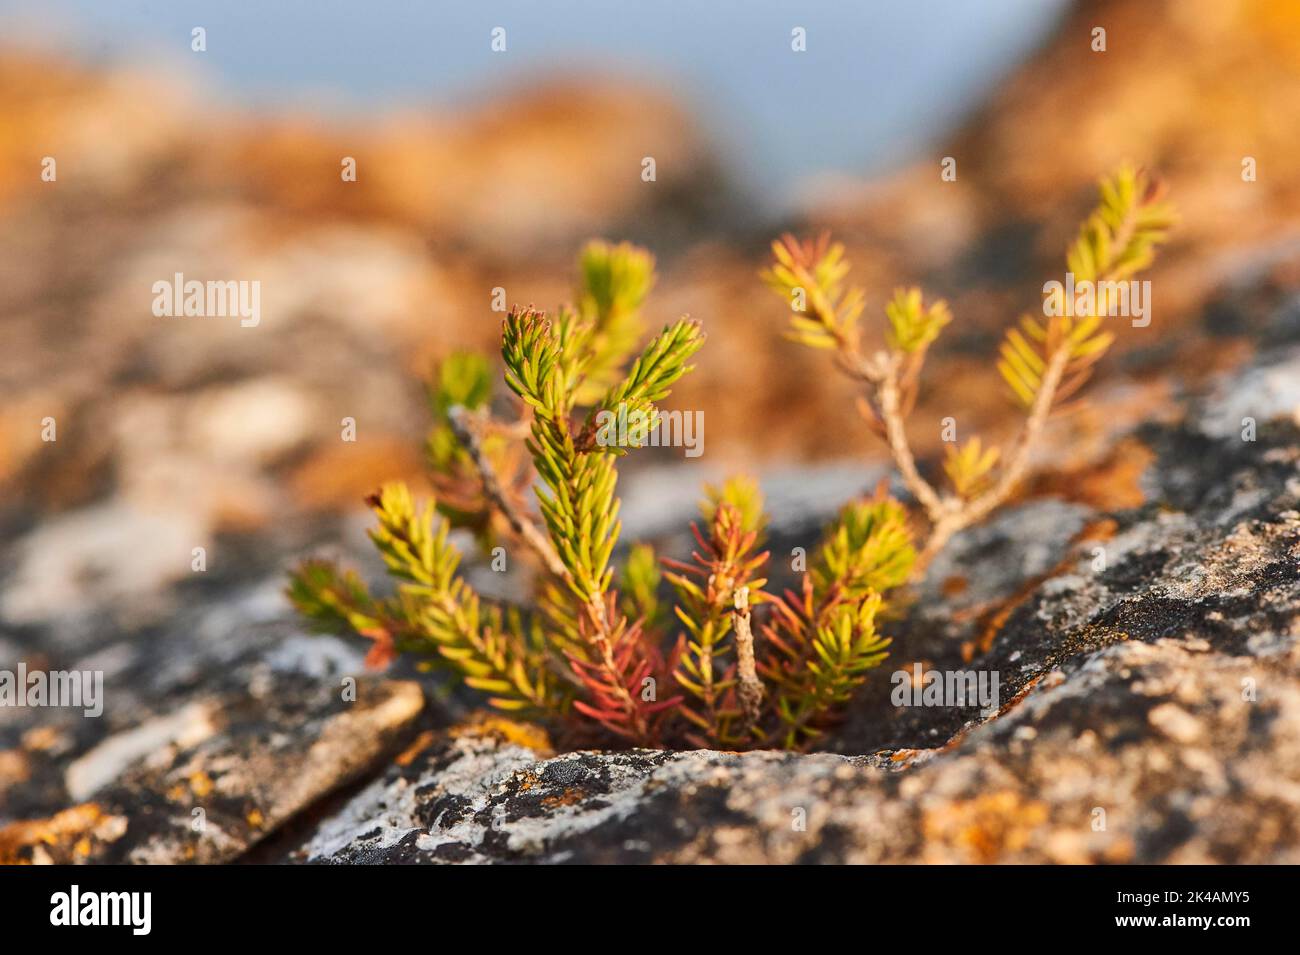 Black crowberry (Empetrum nigrum) growing at Mount 'La Talaia del Montmell' at evening, Catalonia, Spain Stock Photo